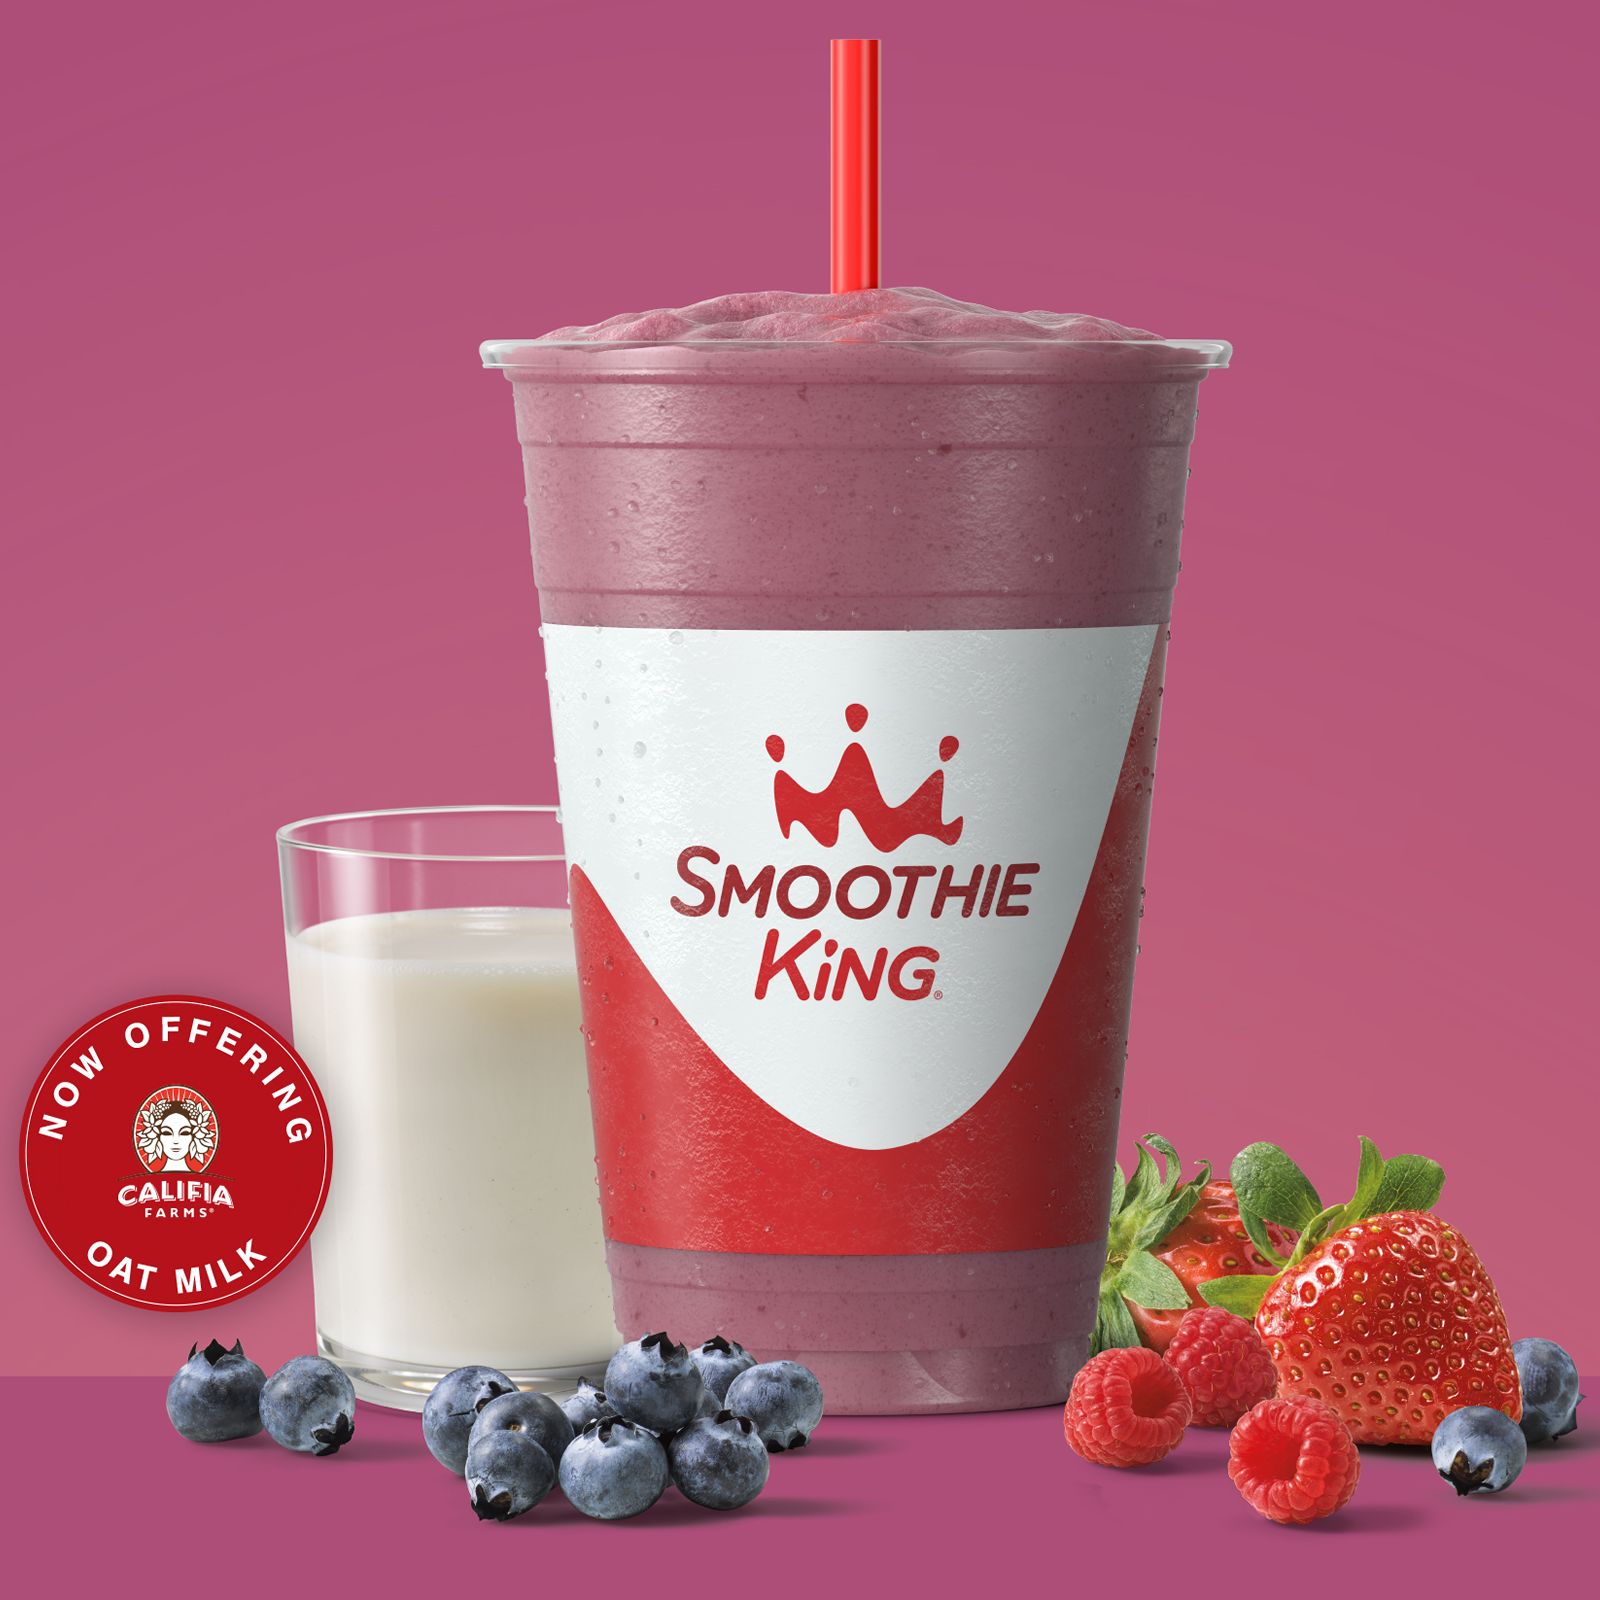 Smoothie King Adds New Plant